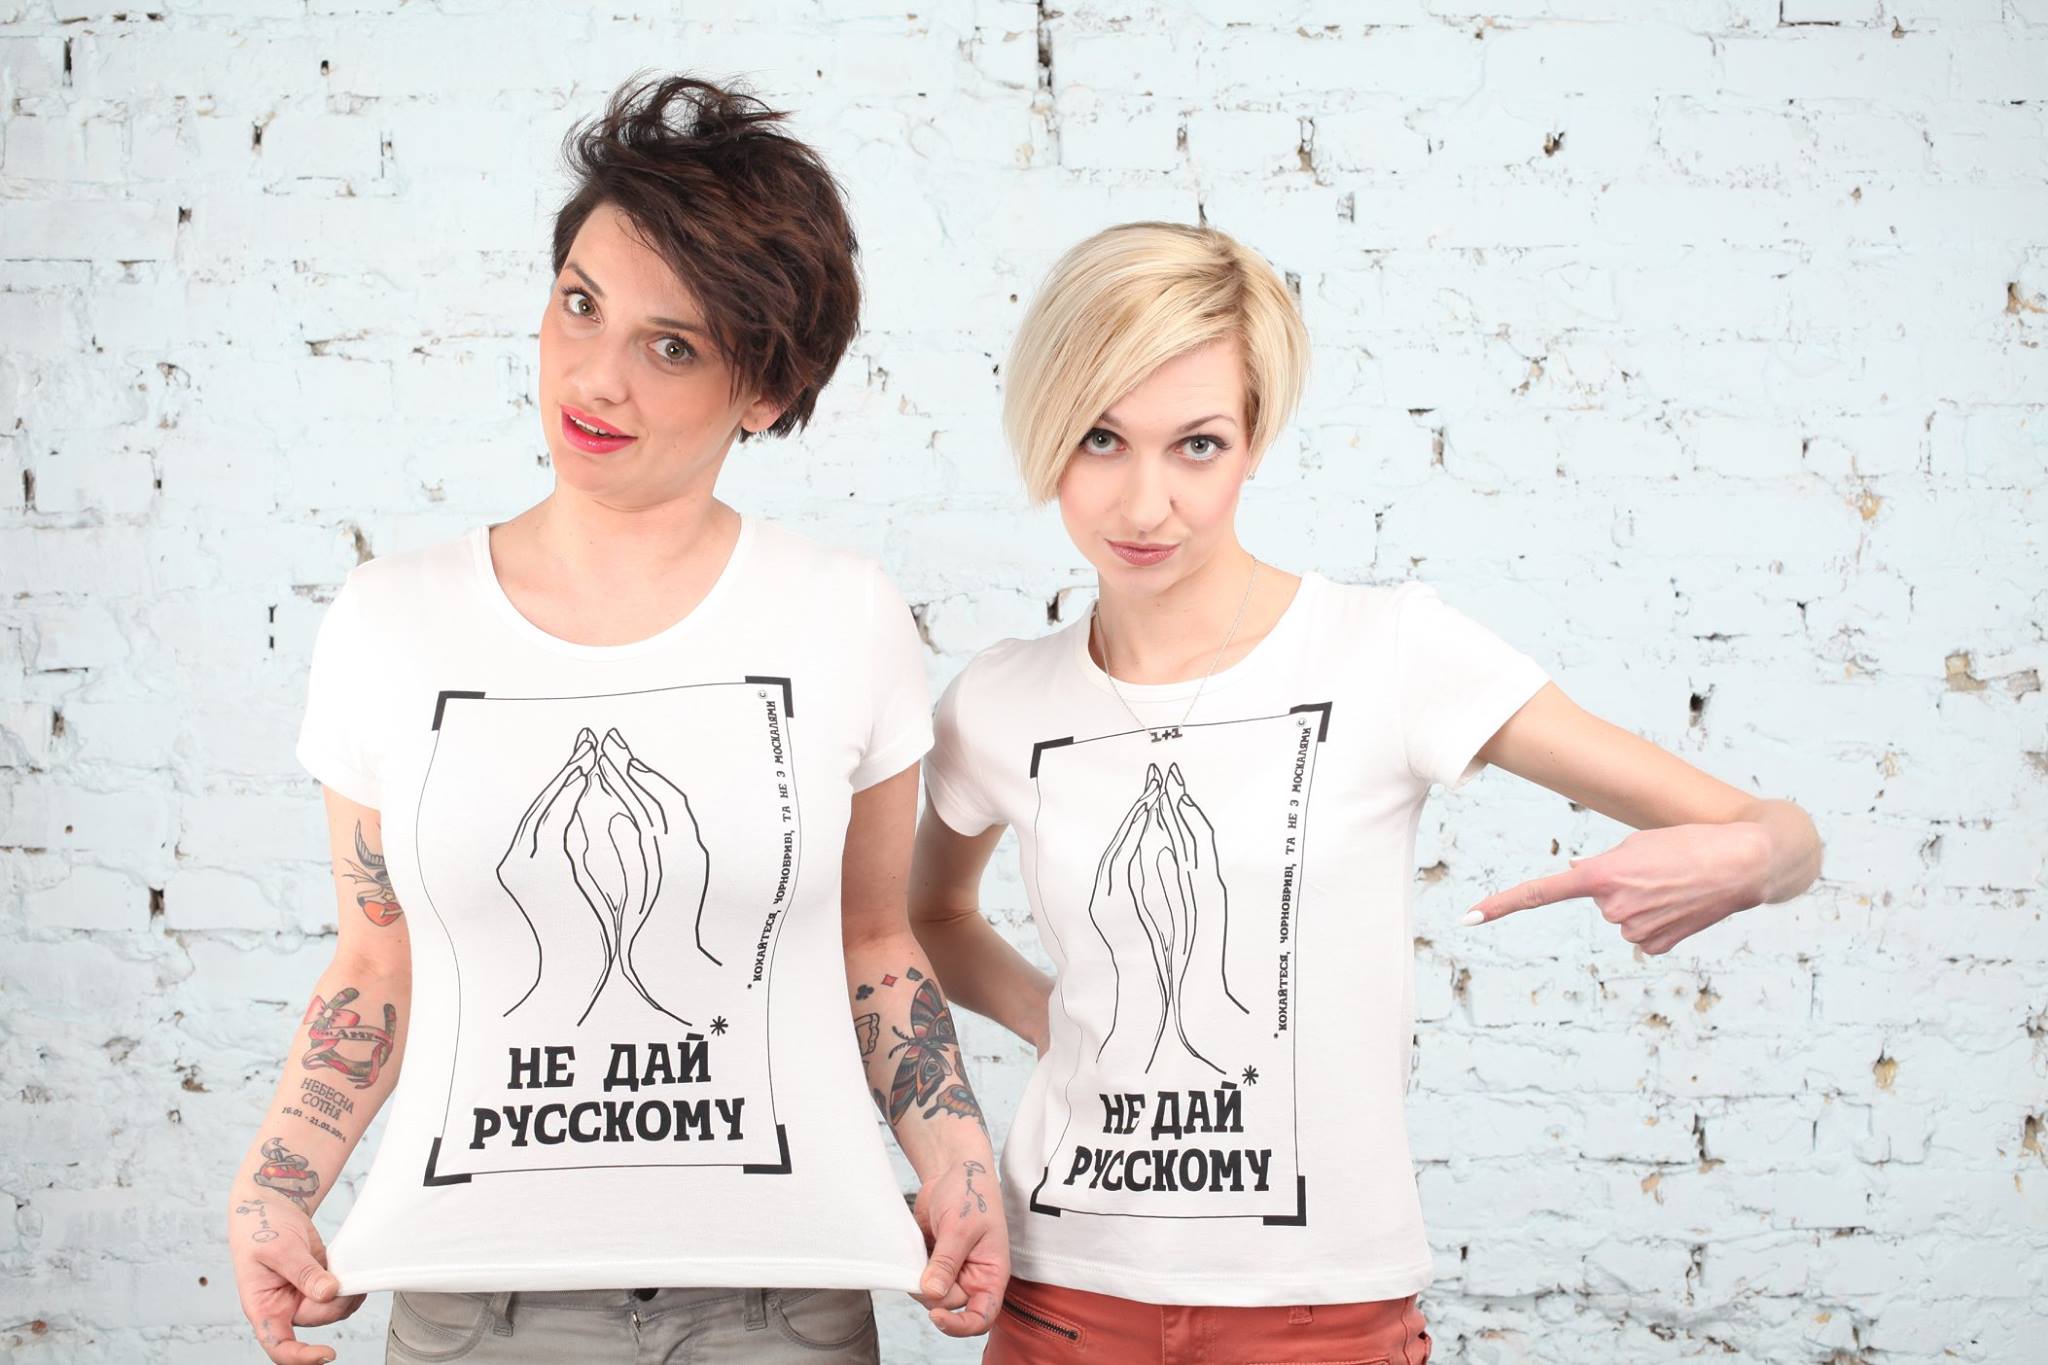 The shirts read "Don't give it to a Russian," and proceeds from their sale will go to the Ukrainian army